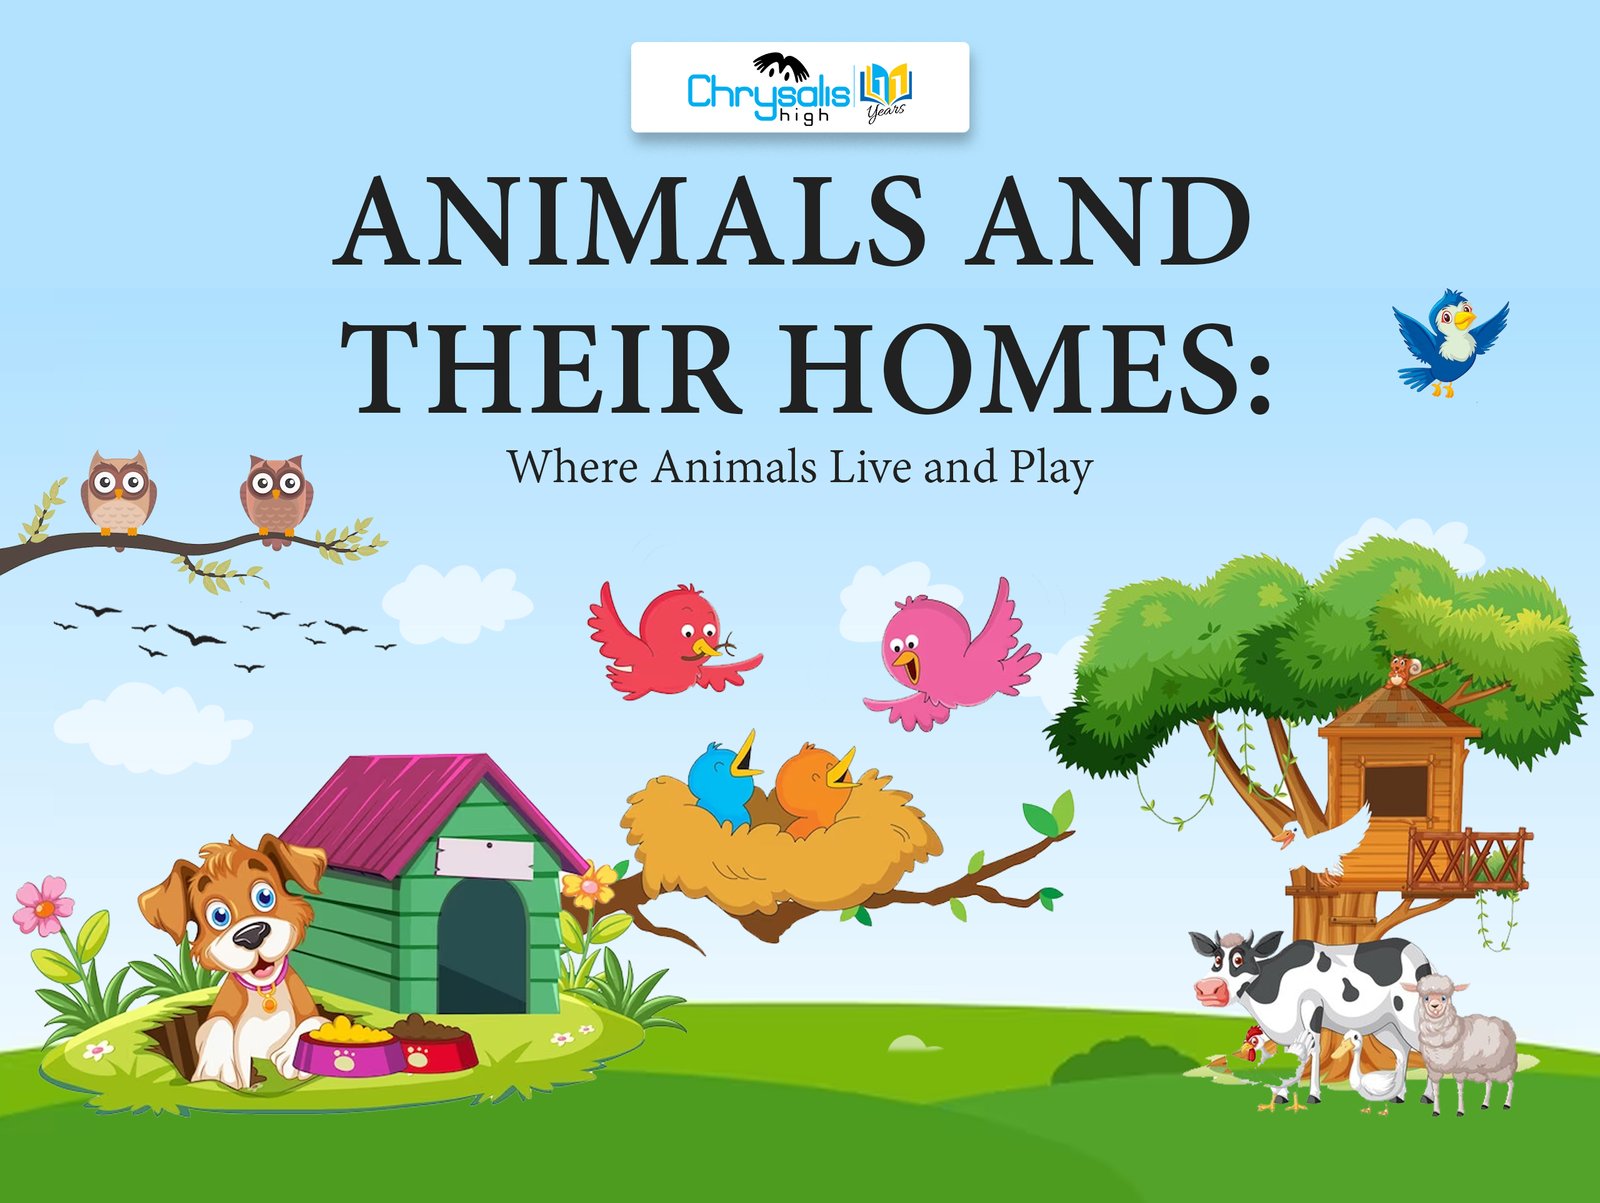 animals and homes